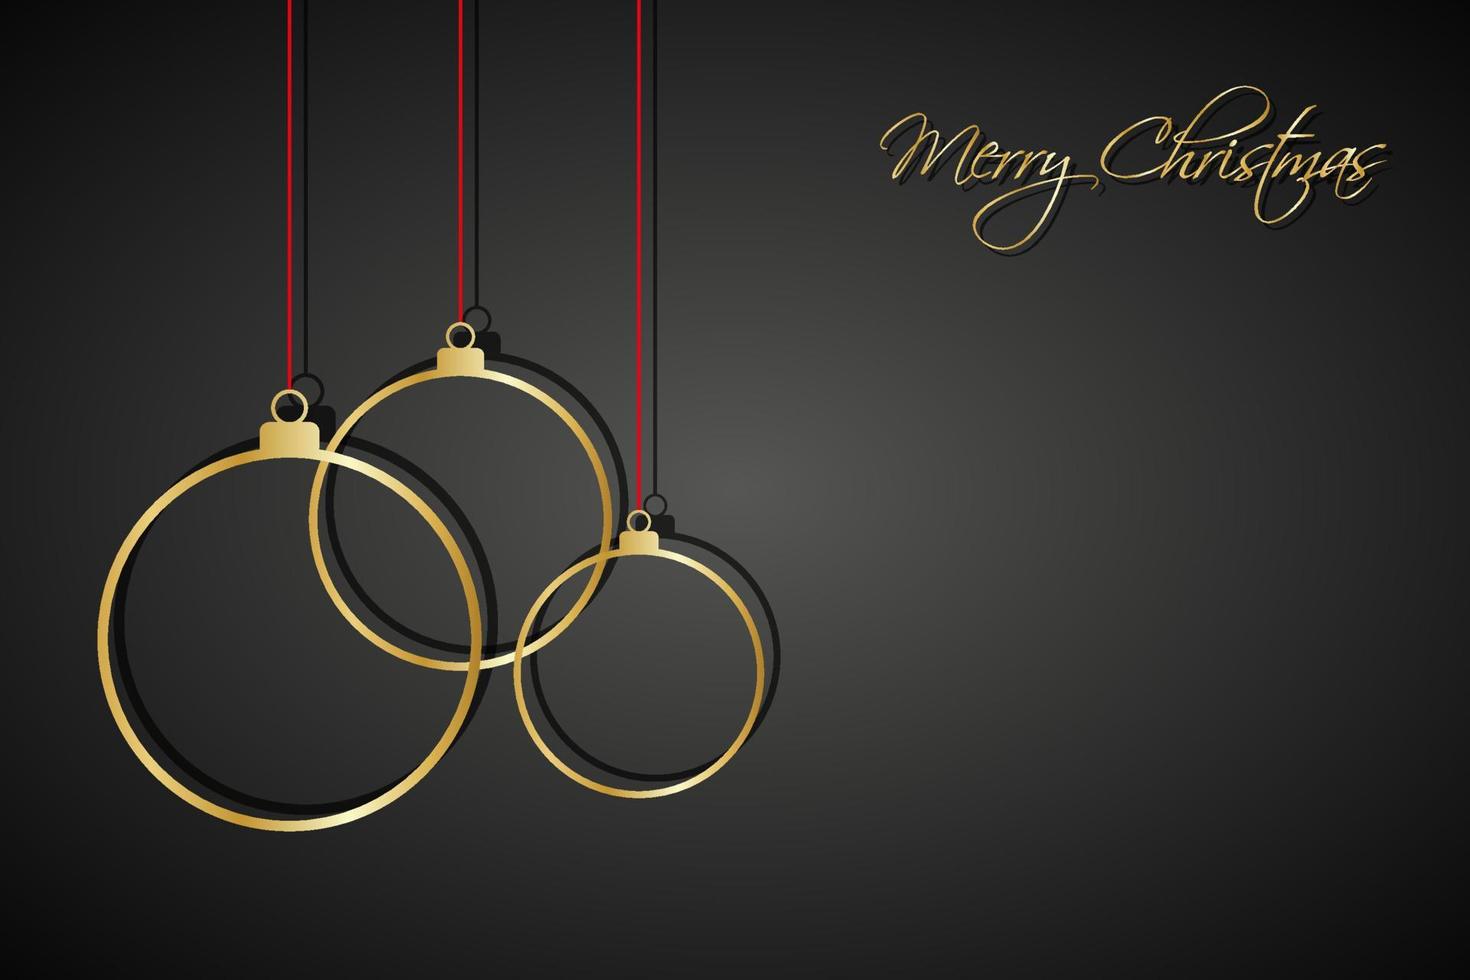 Three golden Christmas balls with red strings on black background. Holiday greeting card with merry Christmas sign vector